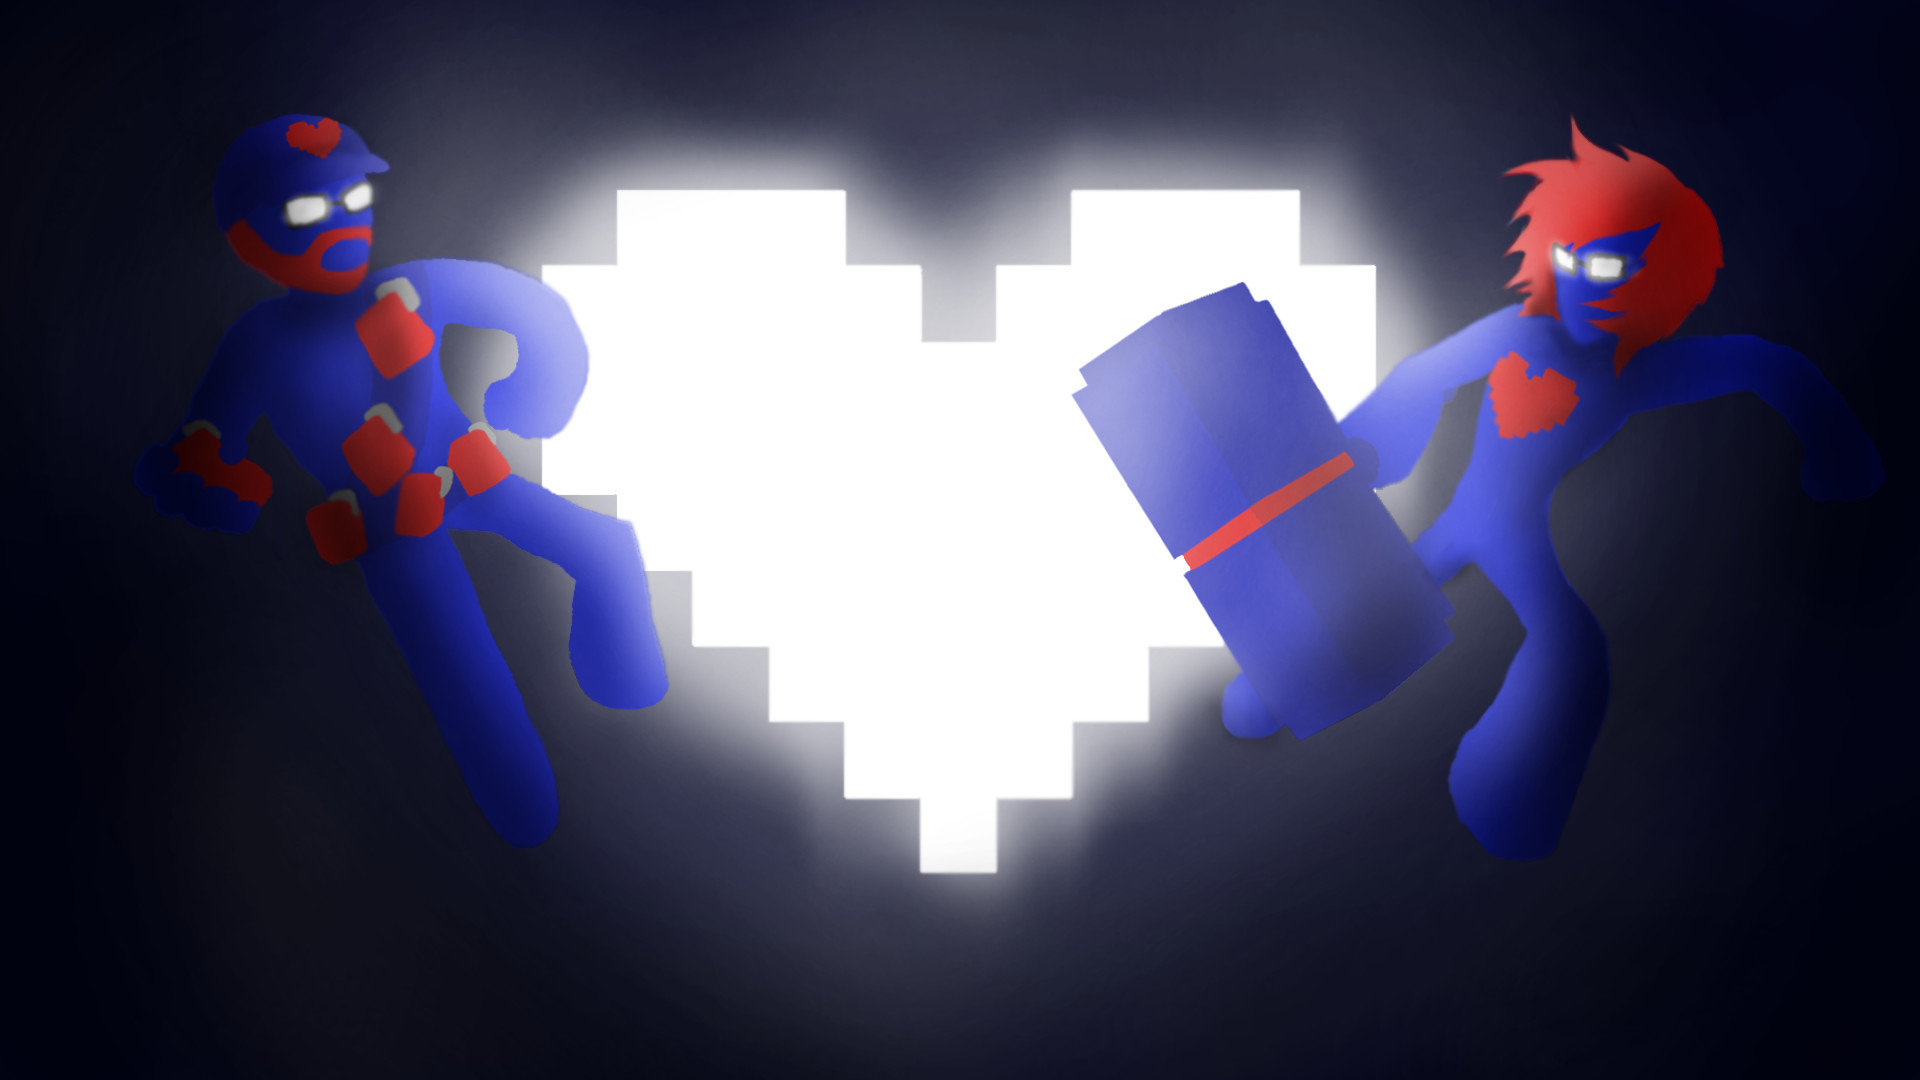 1920x1080 First things first, here's the Pegboard Nerds Wallpaper.